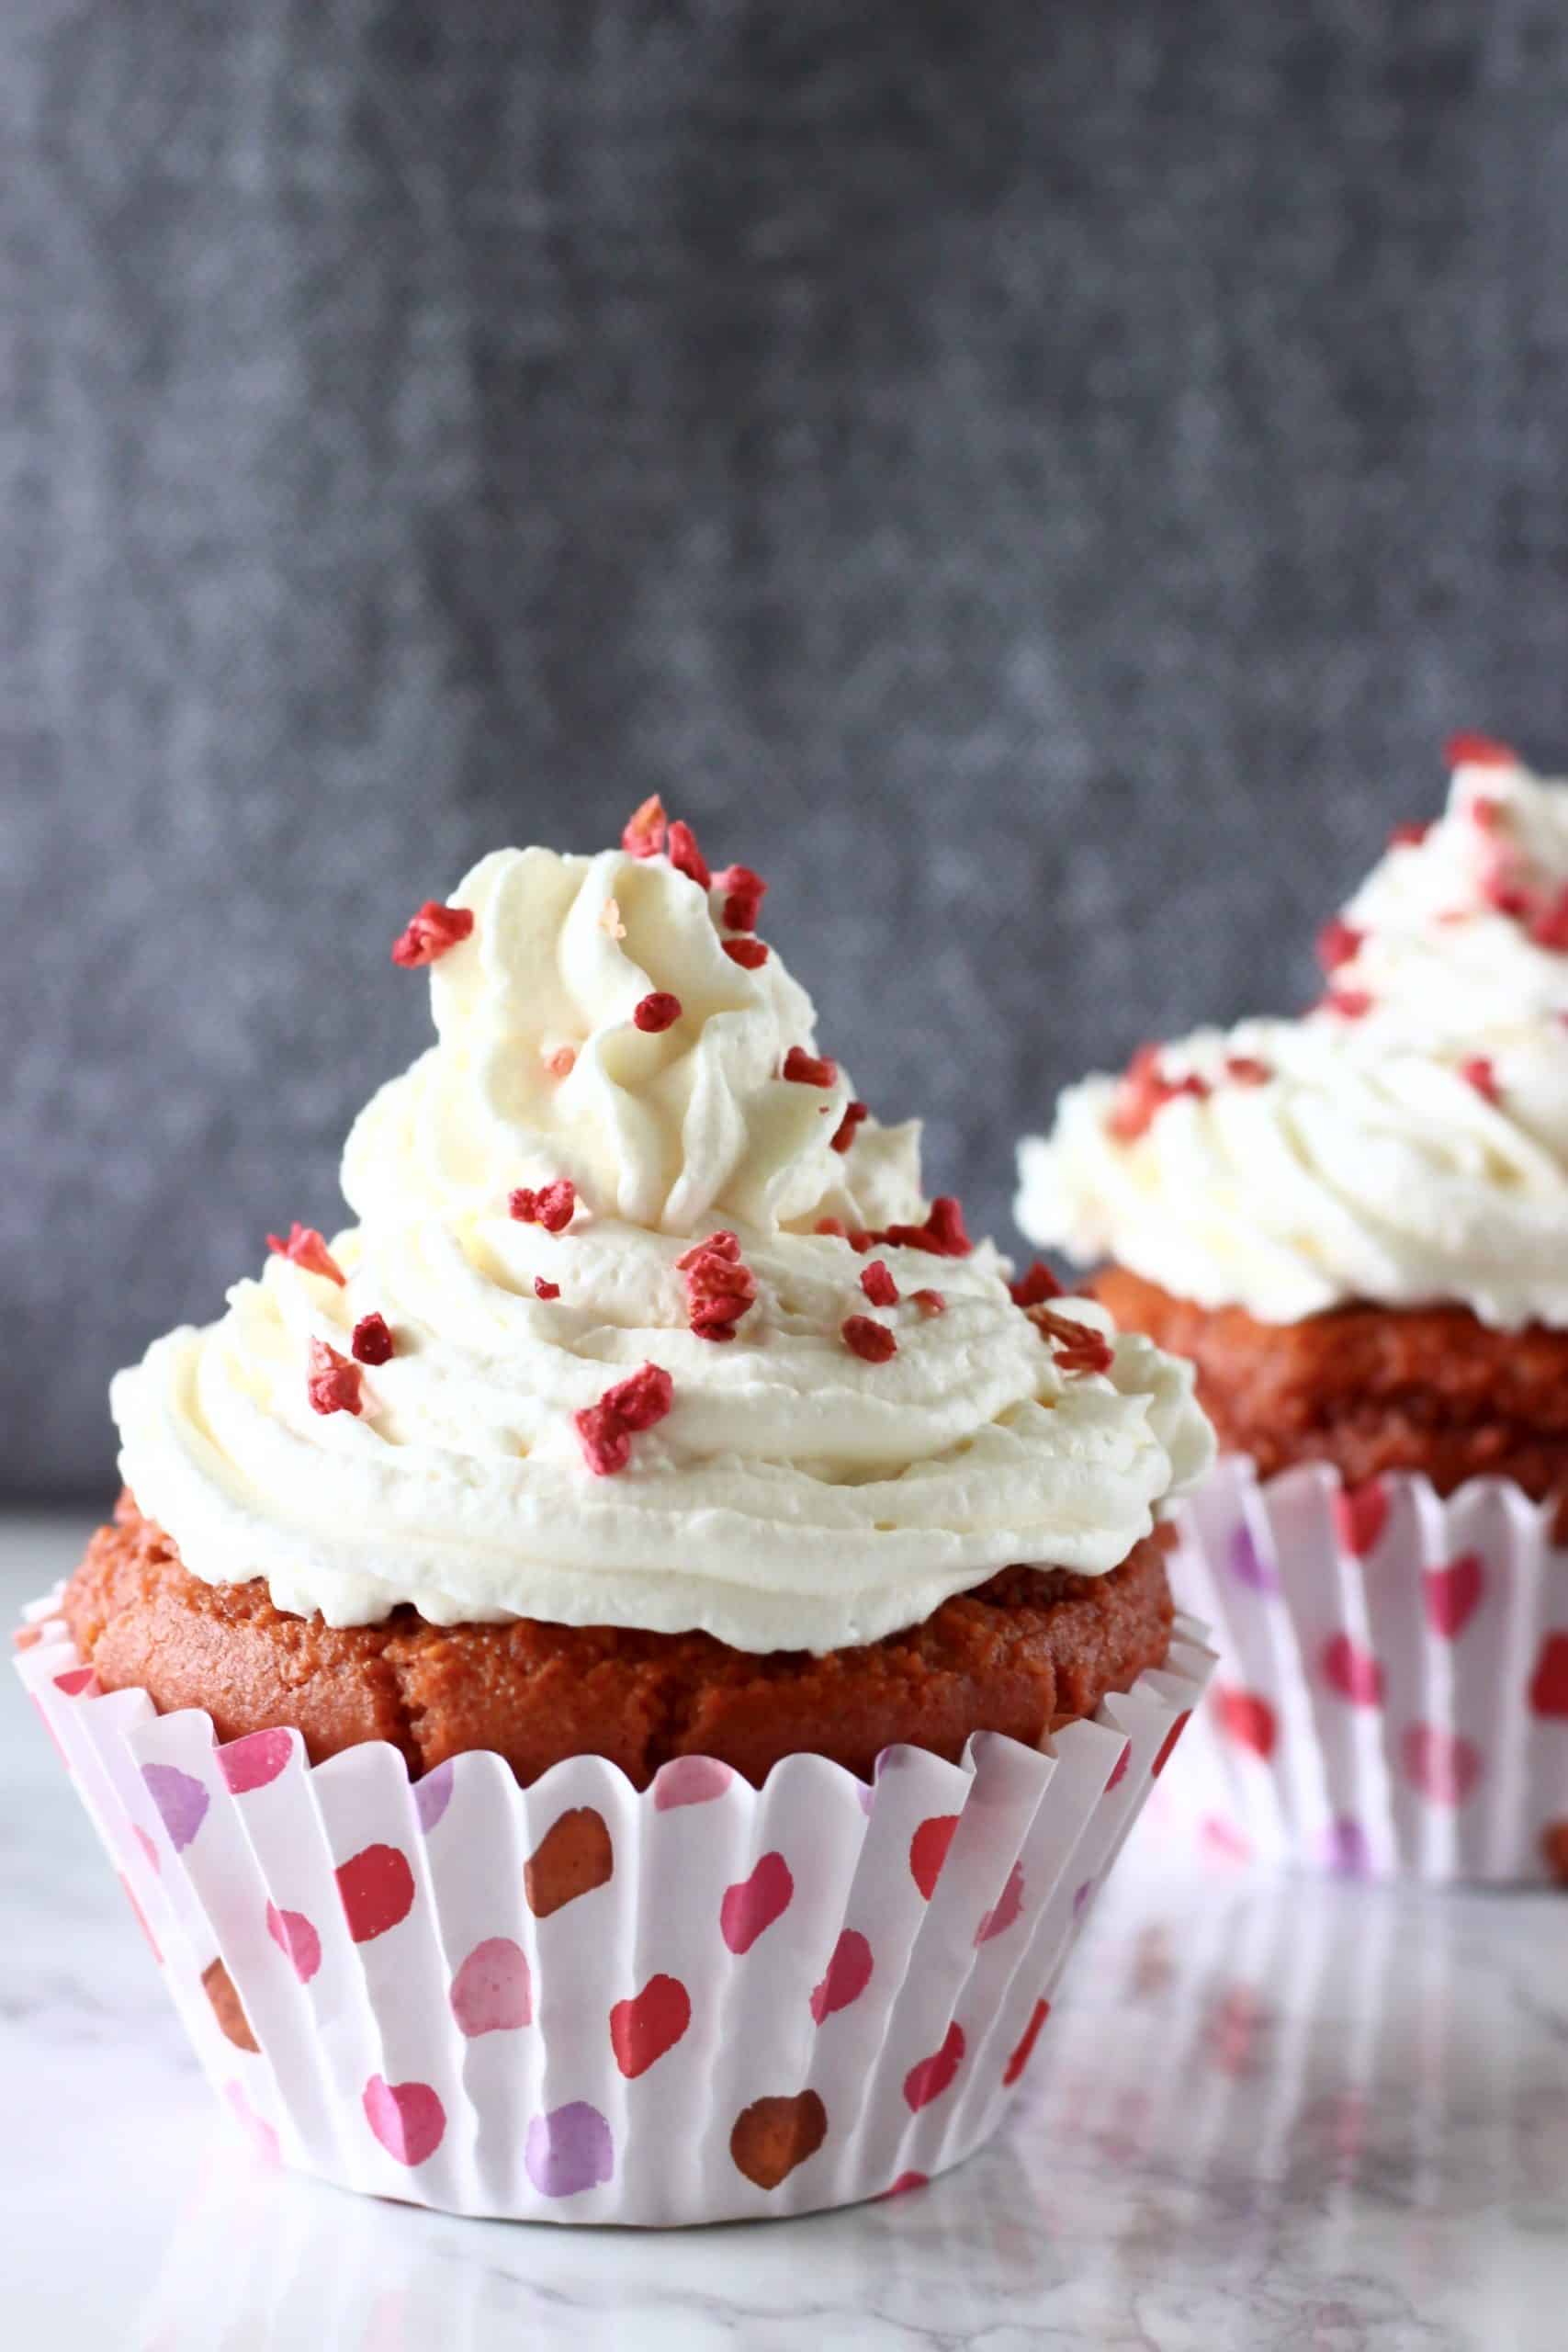 Two gluten-free vegan red velvet cupcakes topped with white frosting